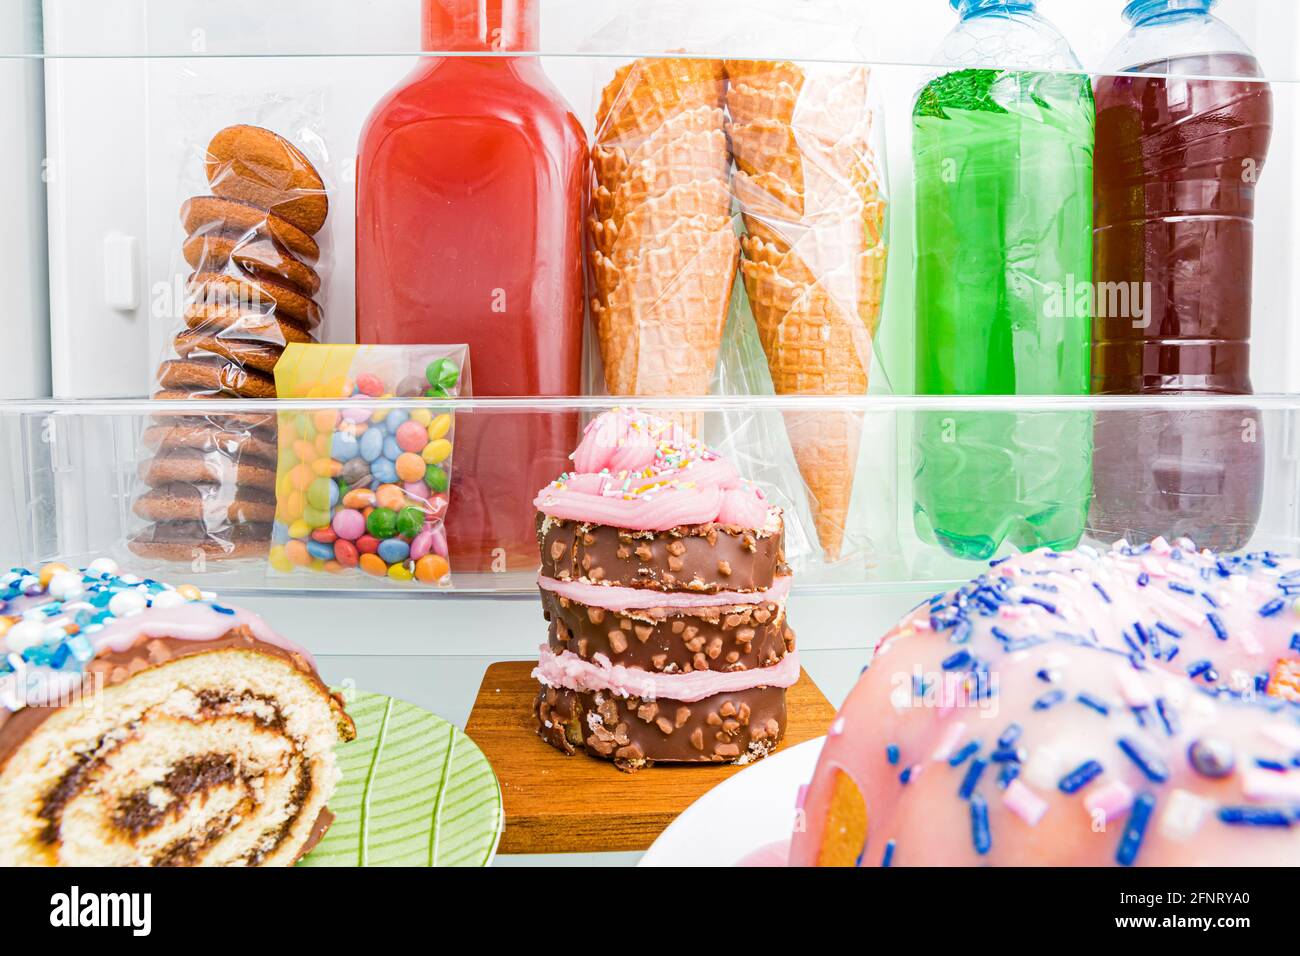 Close-up fridge from inside, glass shelves with colourful desserts, cakes, cookies, candies, bottles of sugar drinks. Unhealthy eating, sugar food con Stock Photo